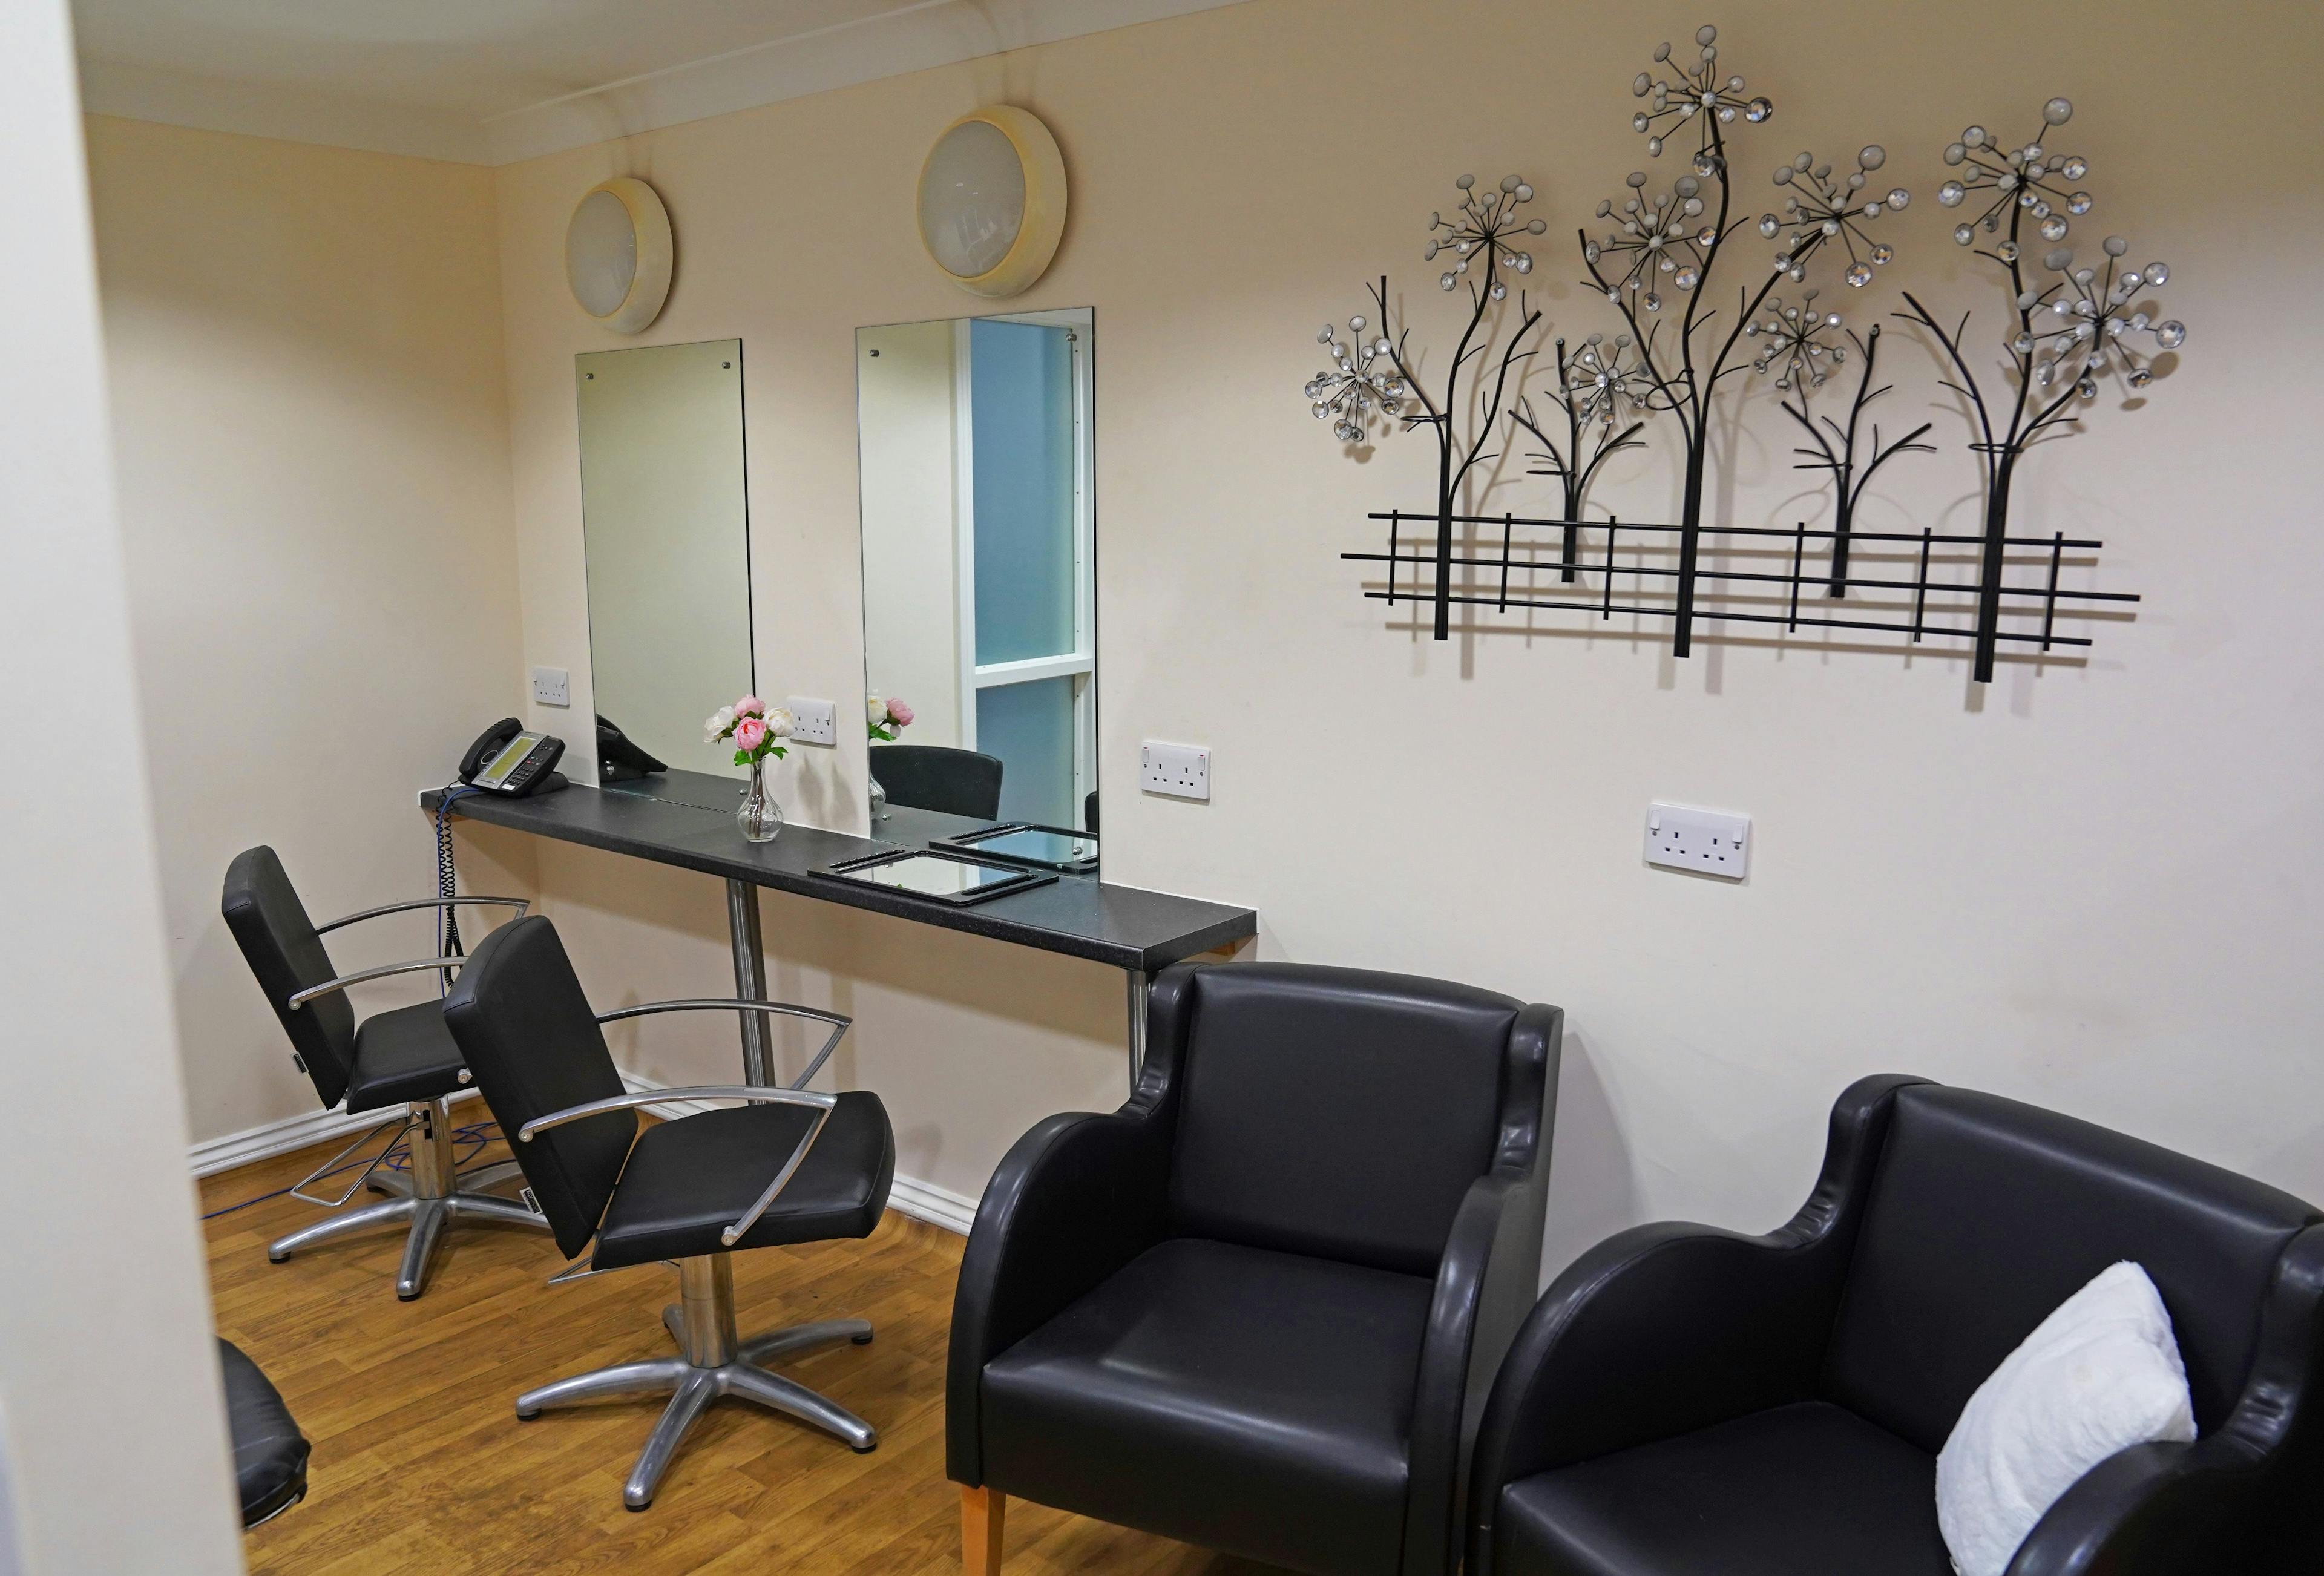 Salon of Haven care home in Pinner, London